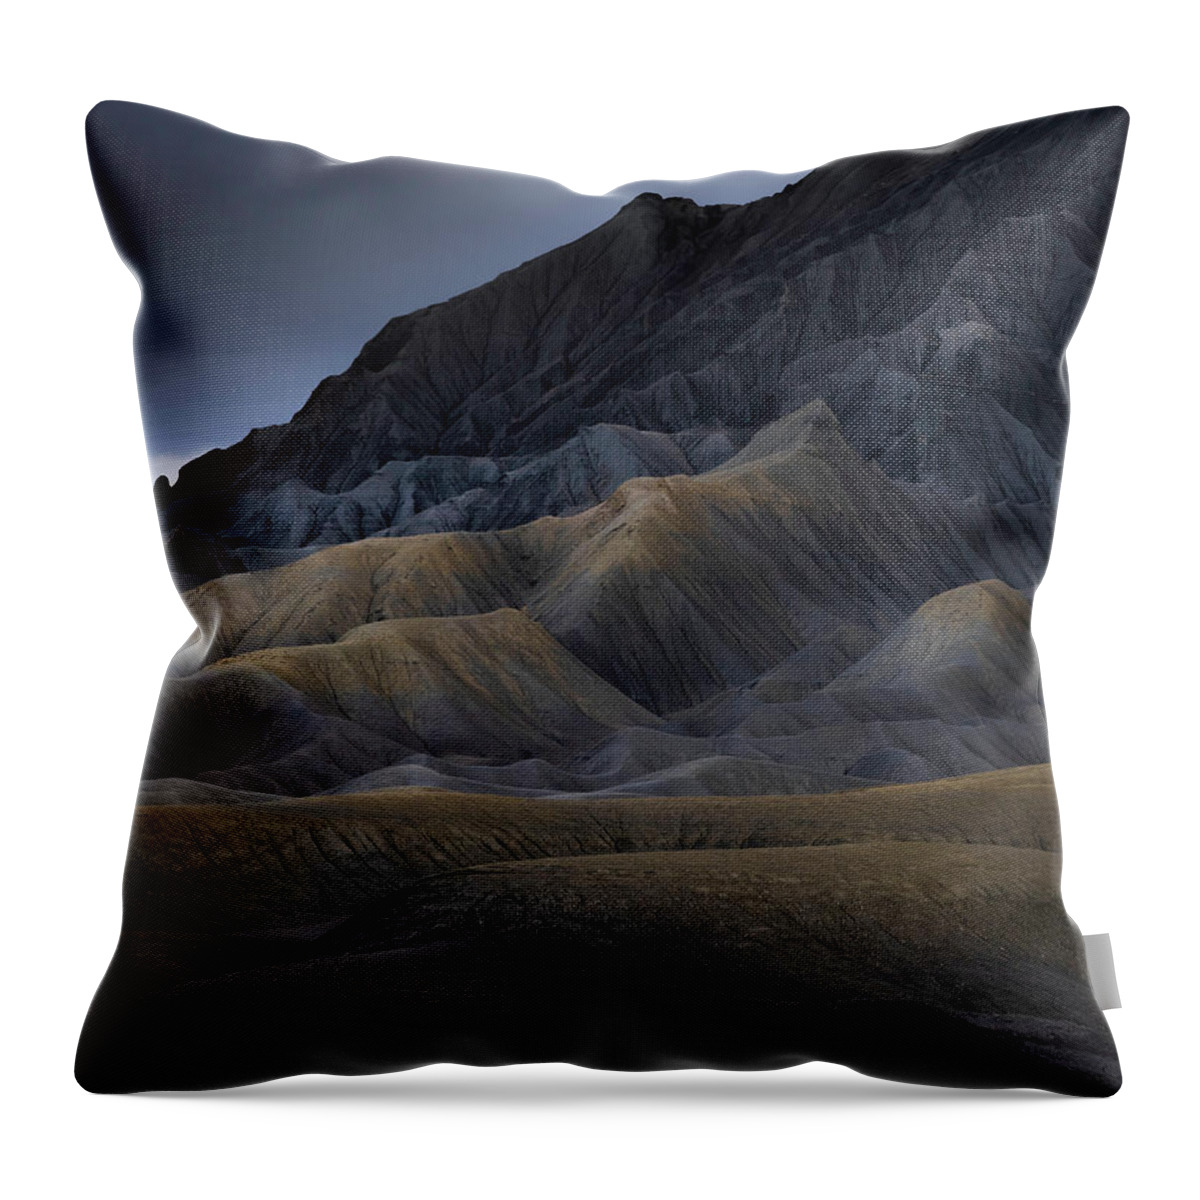 Utah Throw Pillow featuring the photograph Utah Mountainside by Larry Marshall